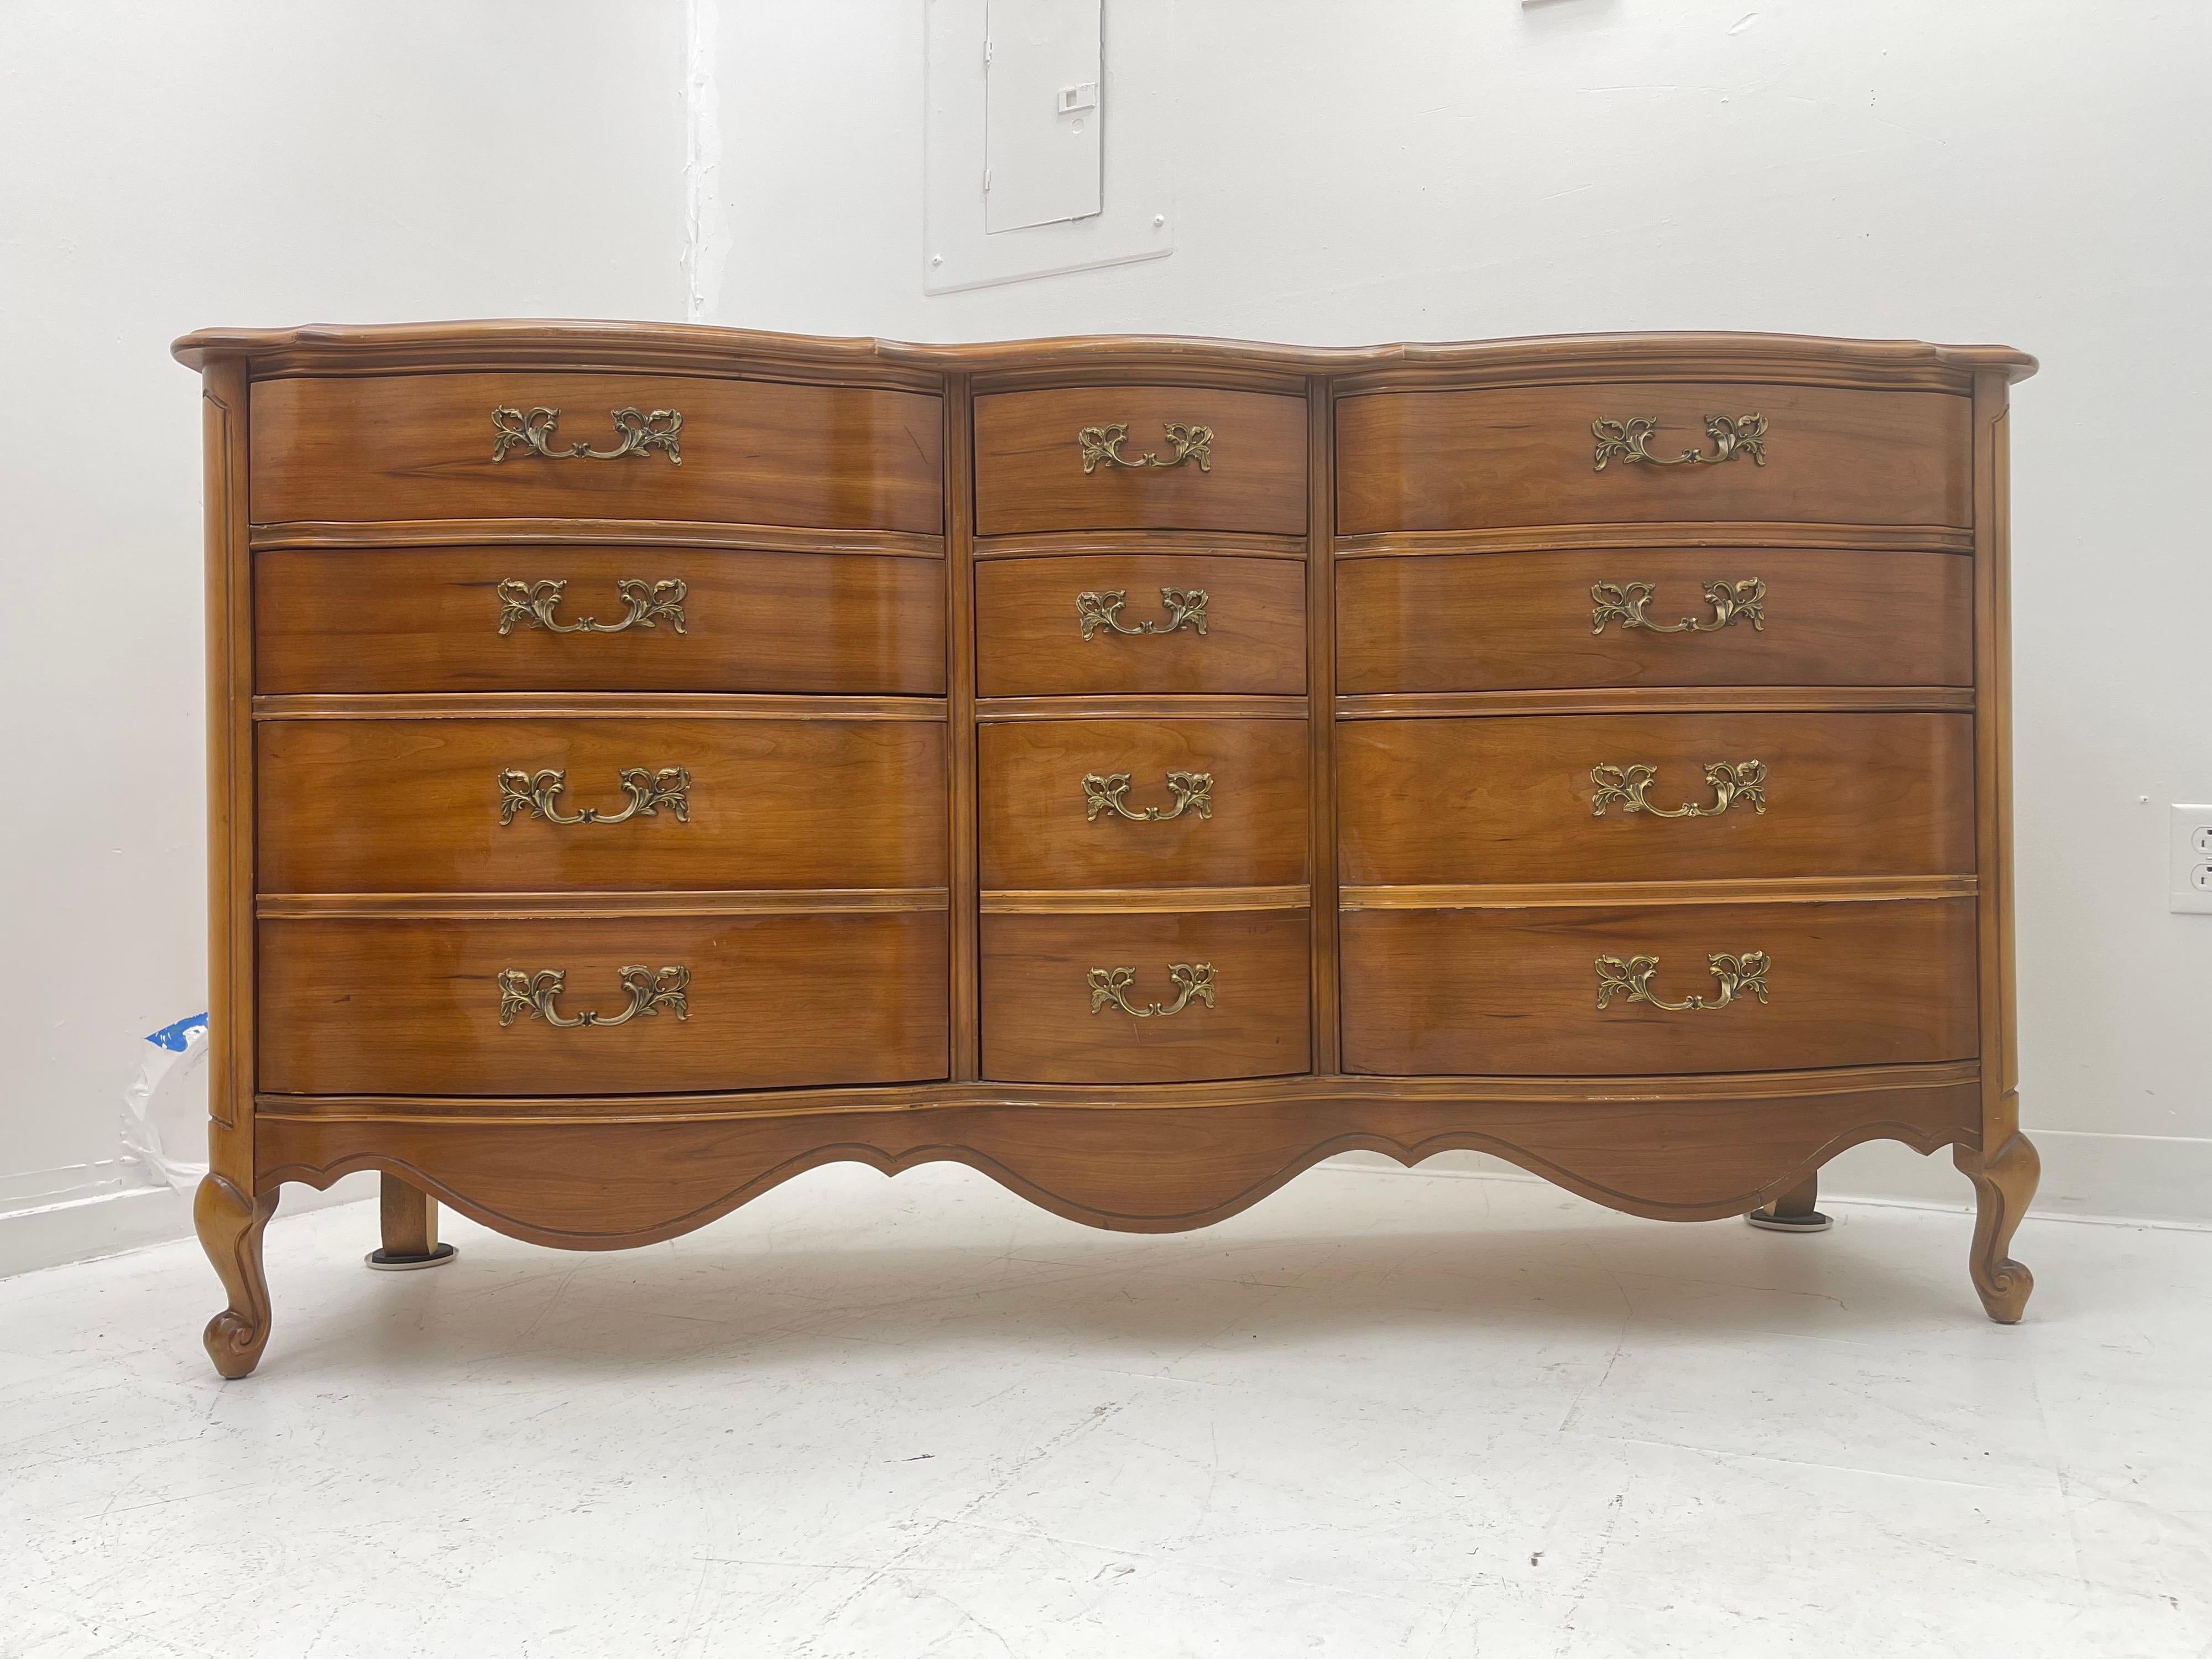 Cherry Vintage French Provincial Dresser or Credenza with Dovetailed Drawers